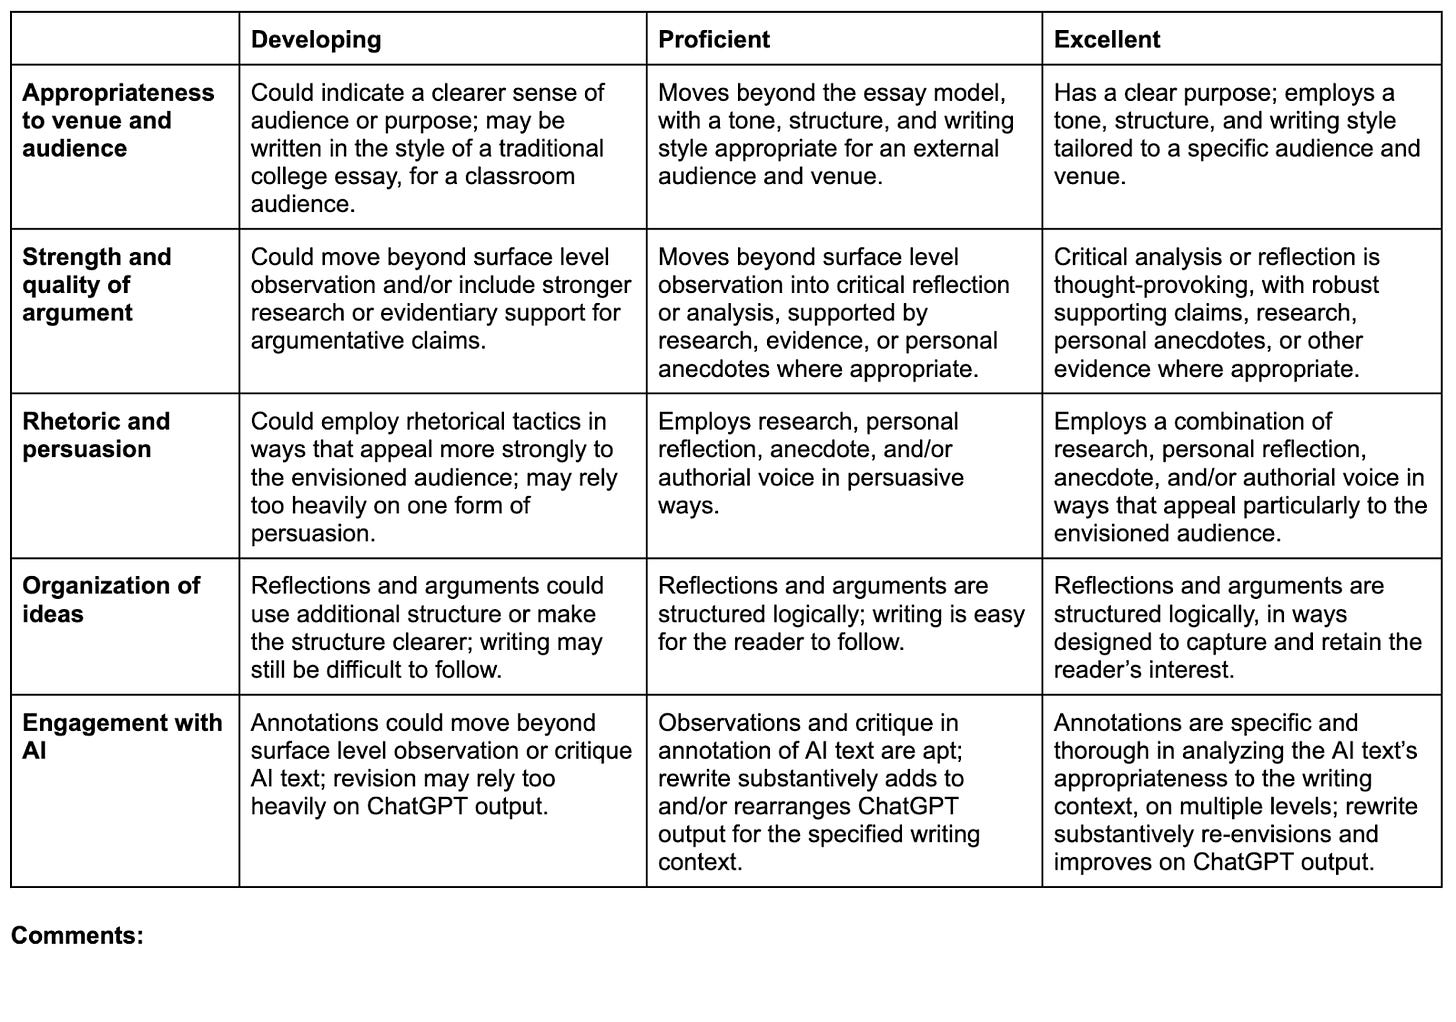 Screenshot of a rubric, formatted as a table. In the lefthand column are categories like “Strength and quality of argument” and “Organization of ideas.” The header row includes spaces to mark whether students are “Developing,” “Proficient,” or “Excellent” along each category. For example, the mark for “Proficient” in “Organization of ideas” reads, “Reflections and arguments are structured logically; writing is easy for the reader to follow.”